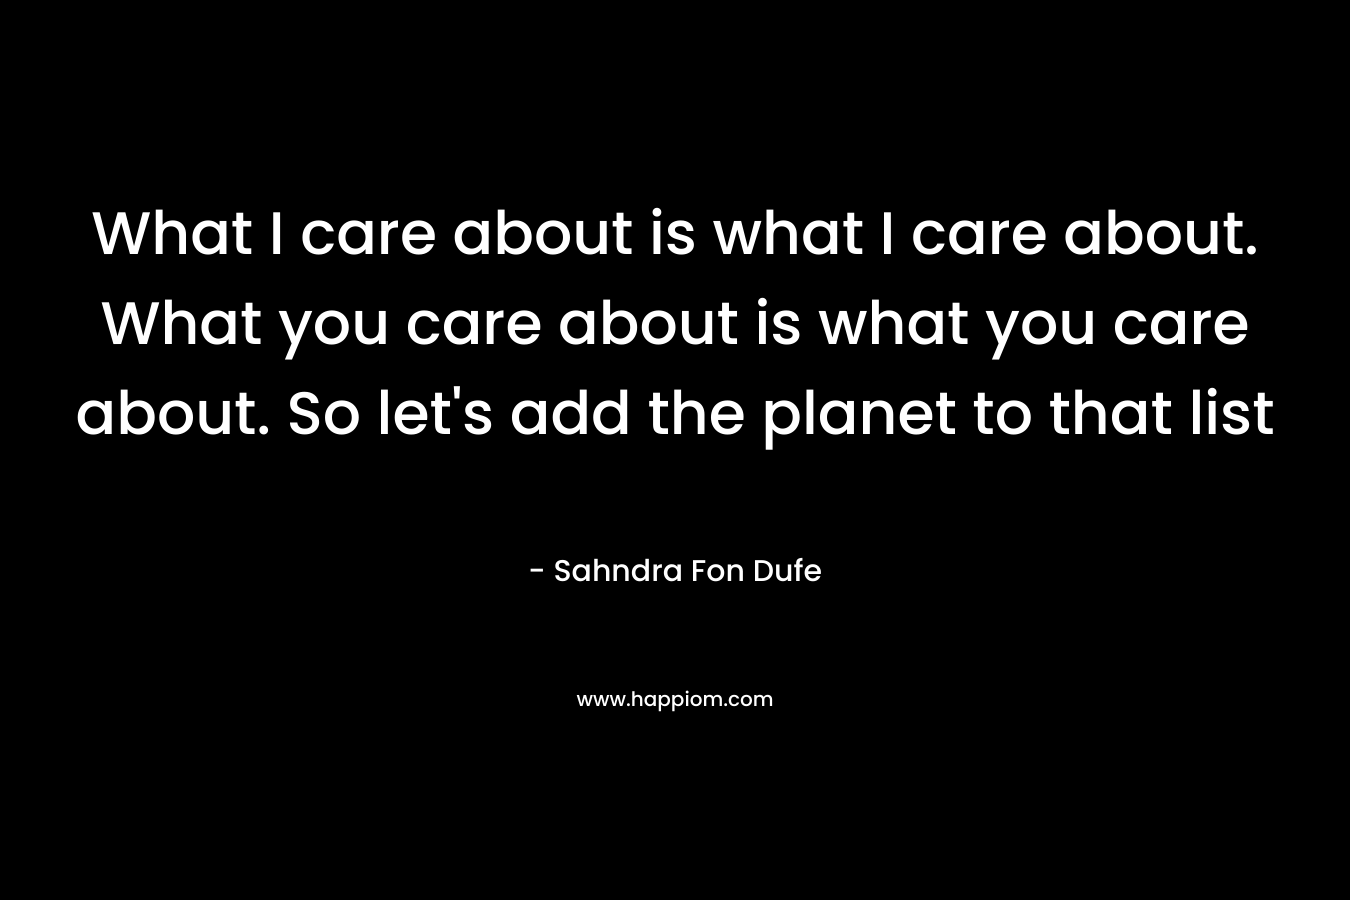 What I care about is what I care about. What you care about is what you care about. So let's add the planet to that list